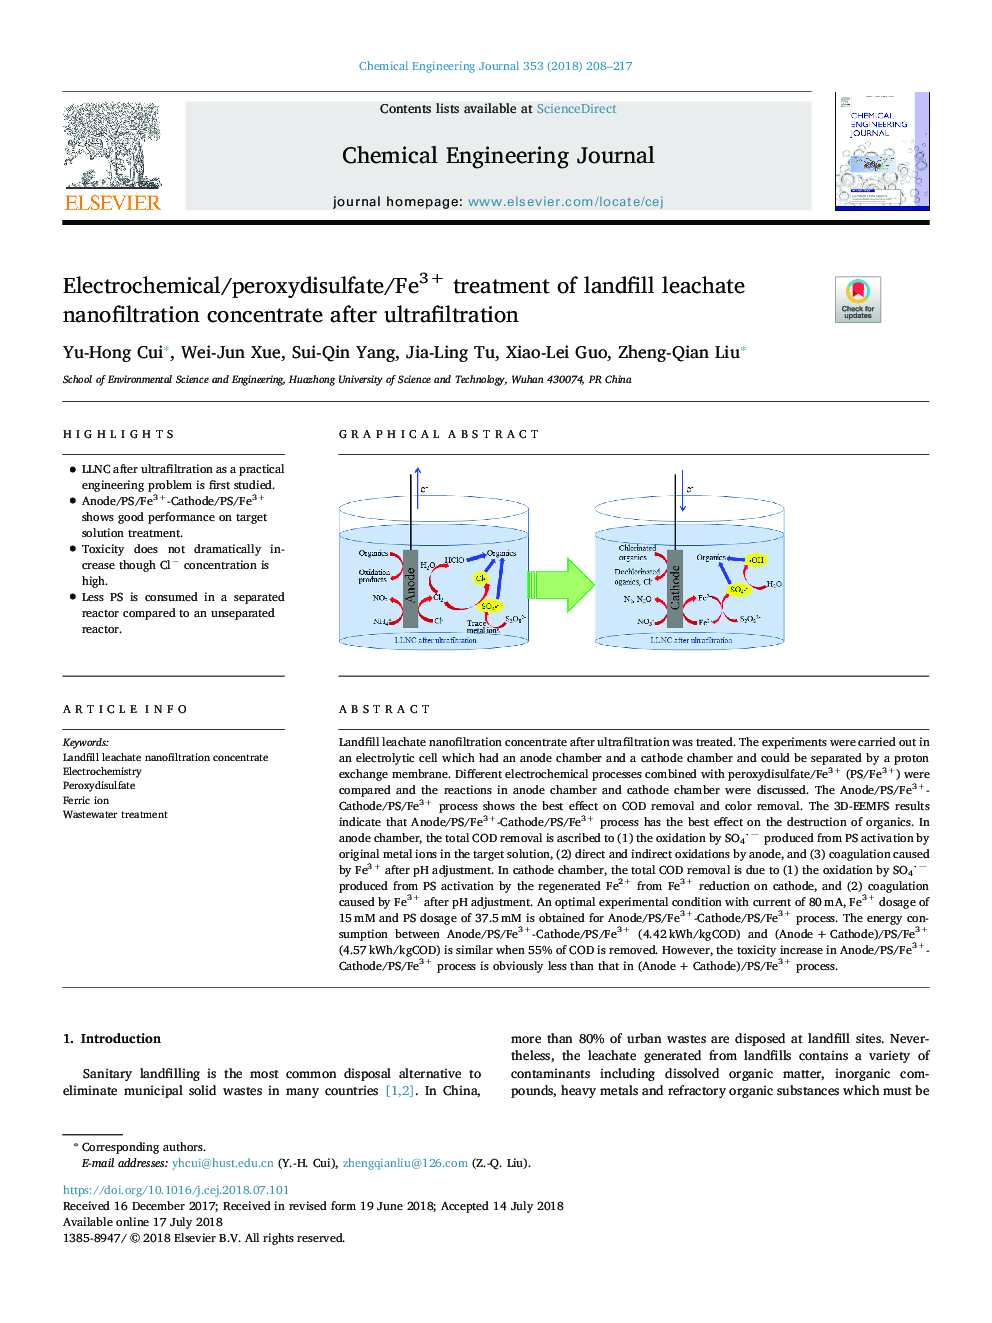 Electrochemical/peroxydisulfate/Fe3+ treatment of landfill leachate nanofiltration concentrate after ultrafiltration